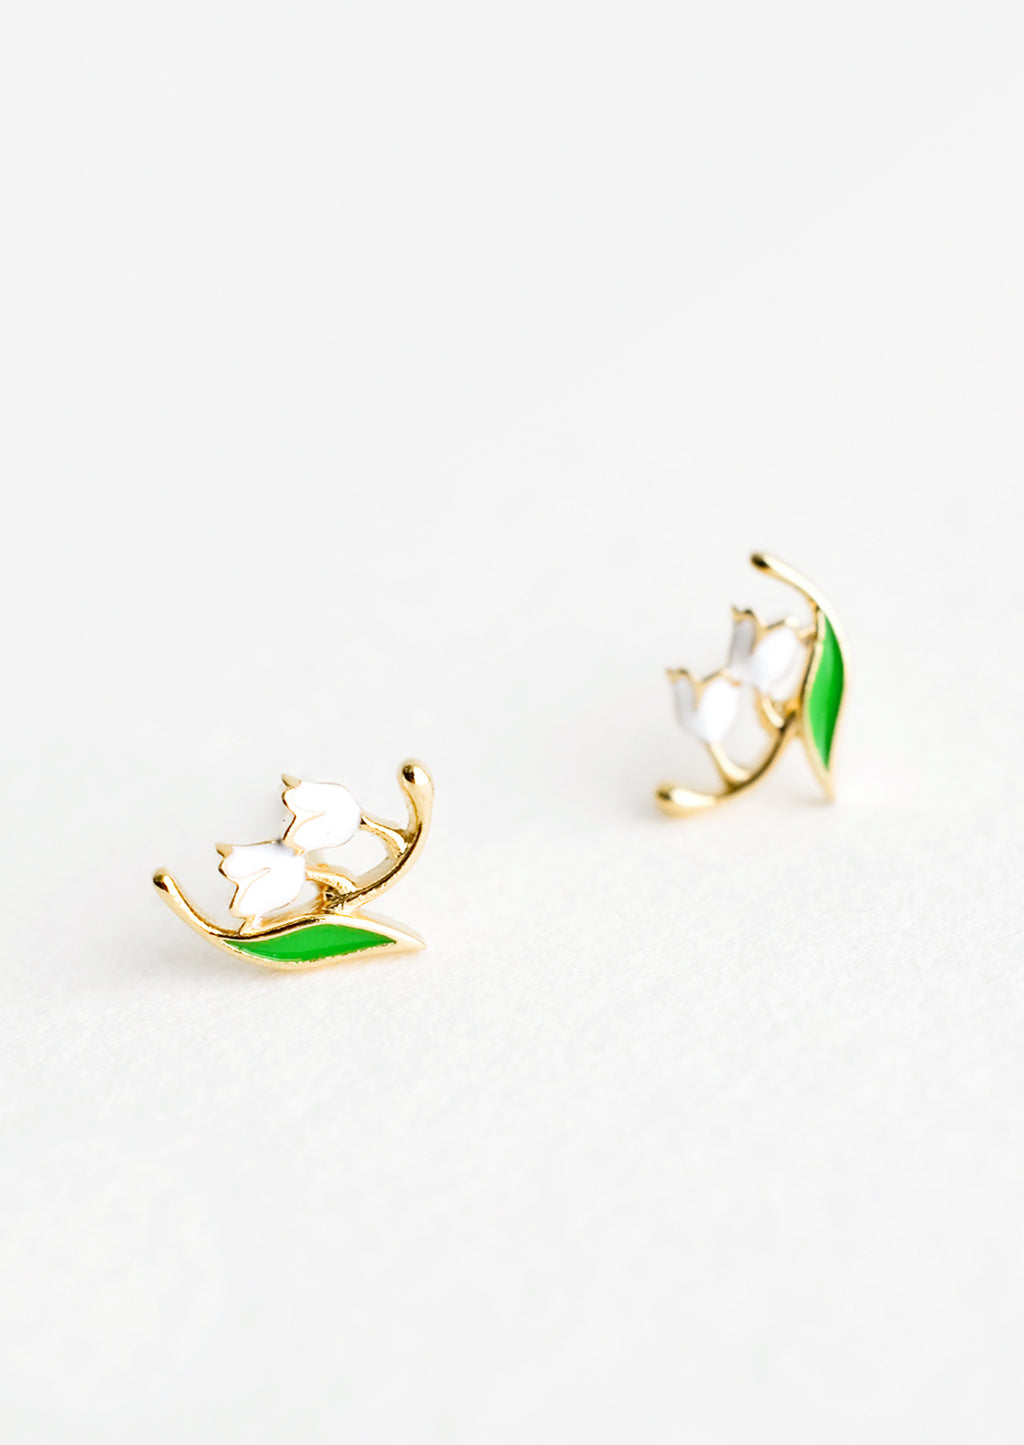 2: Small gold stud earrings in the shape of a lily of the valley flower, constructed in green and white enamel finish.